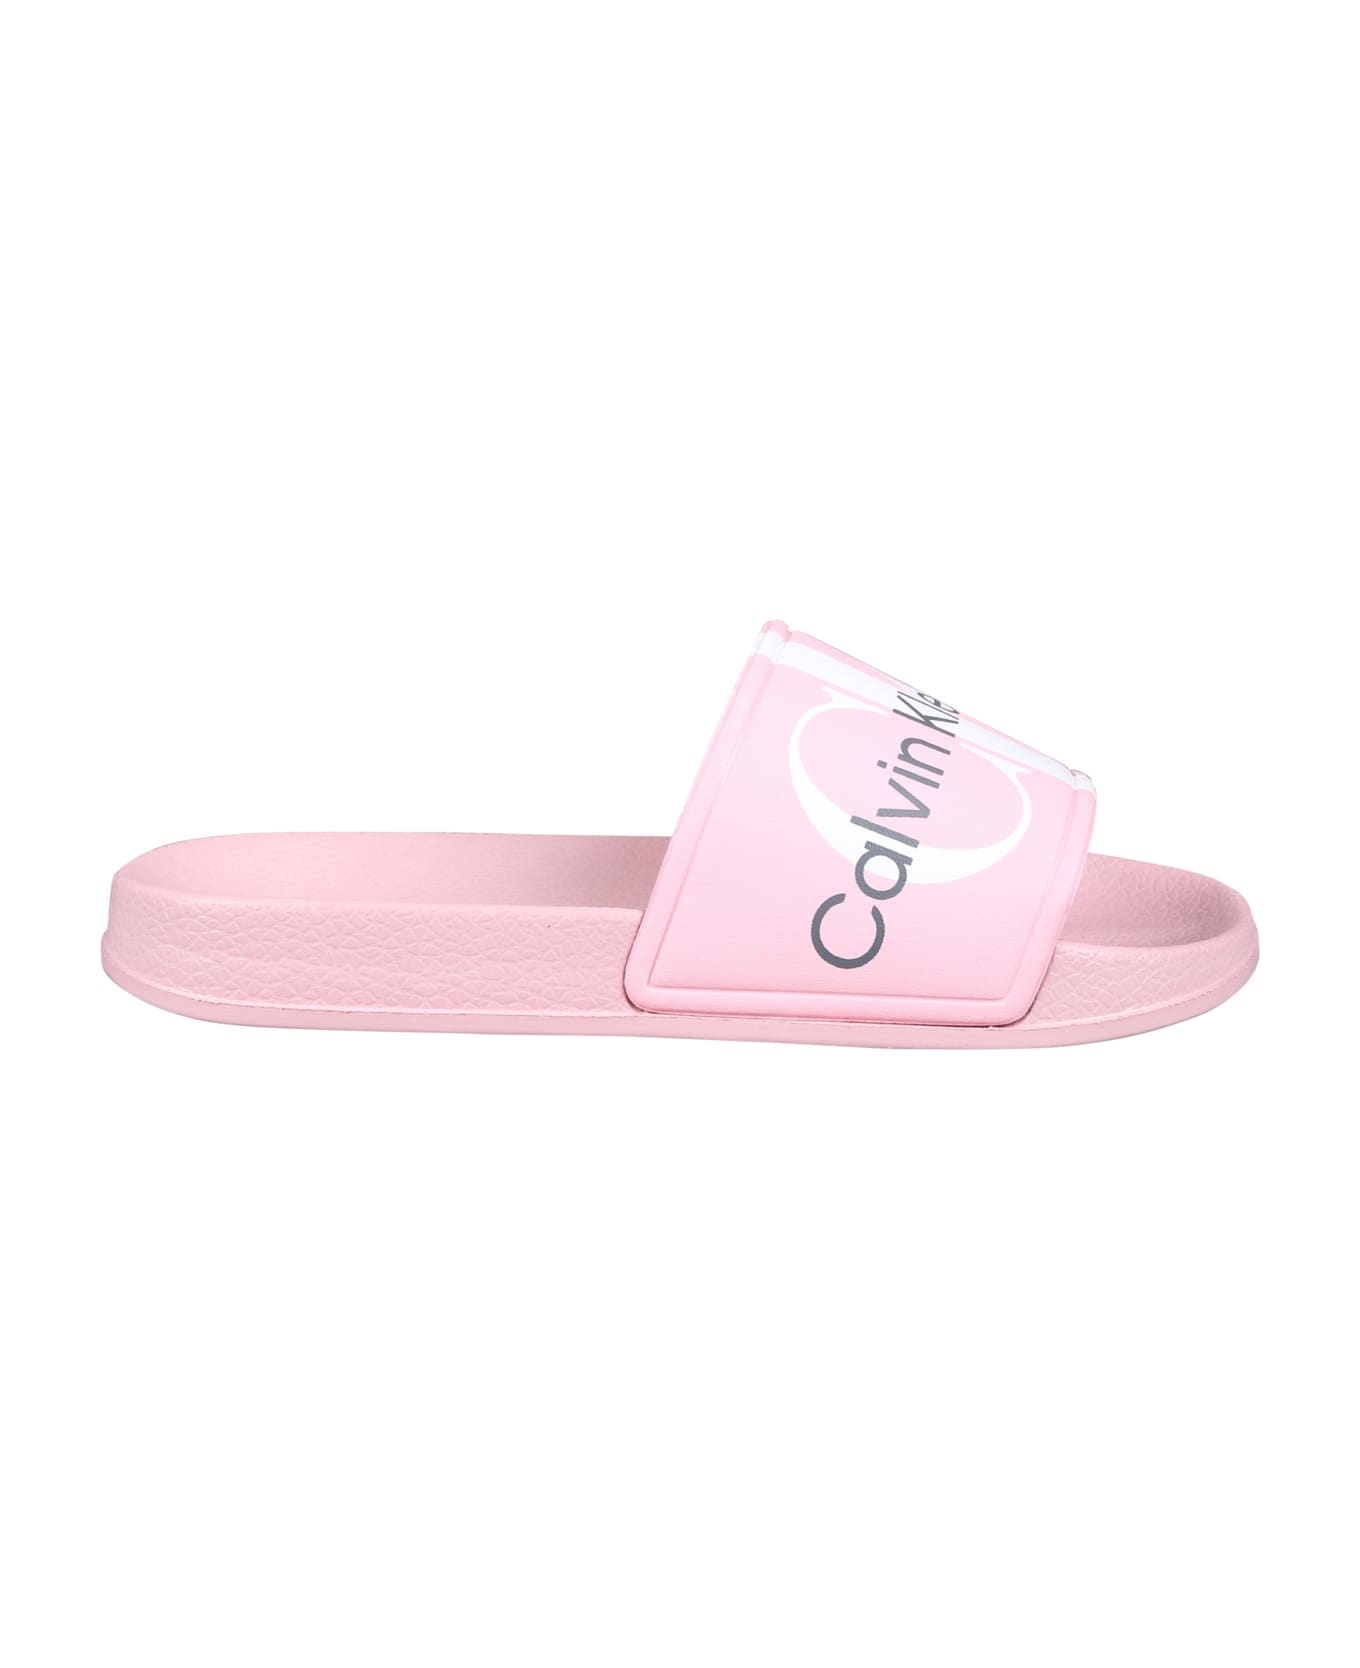 Calvin Klein Pink Slippers For Girl With Logo - Pink シューズ